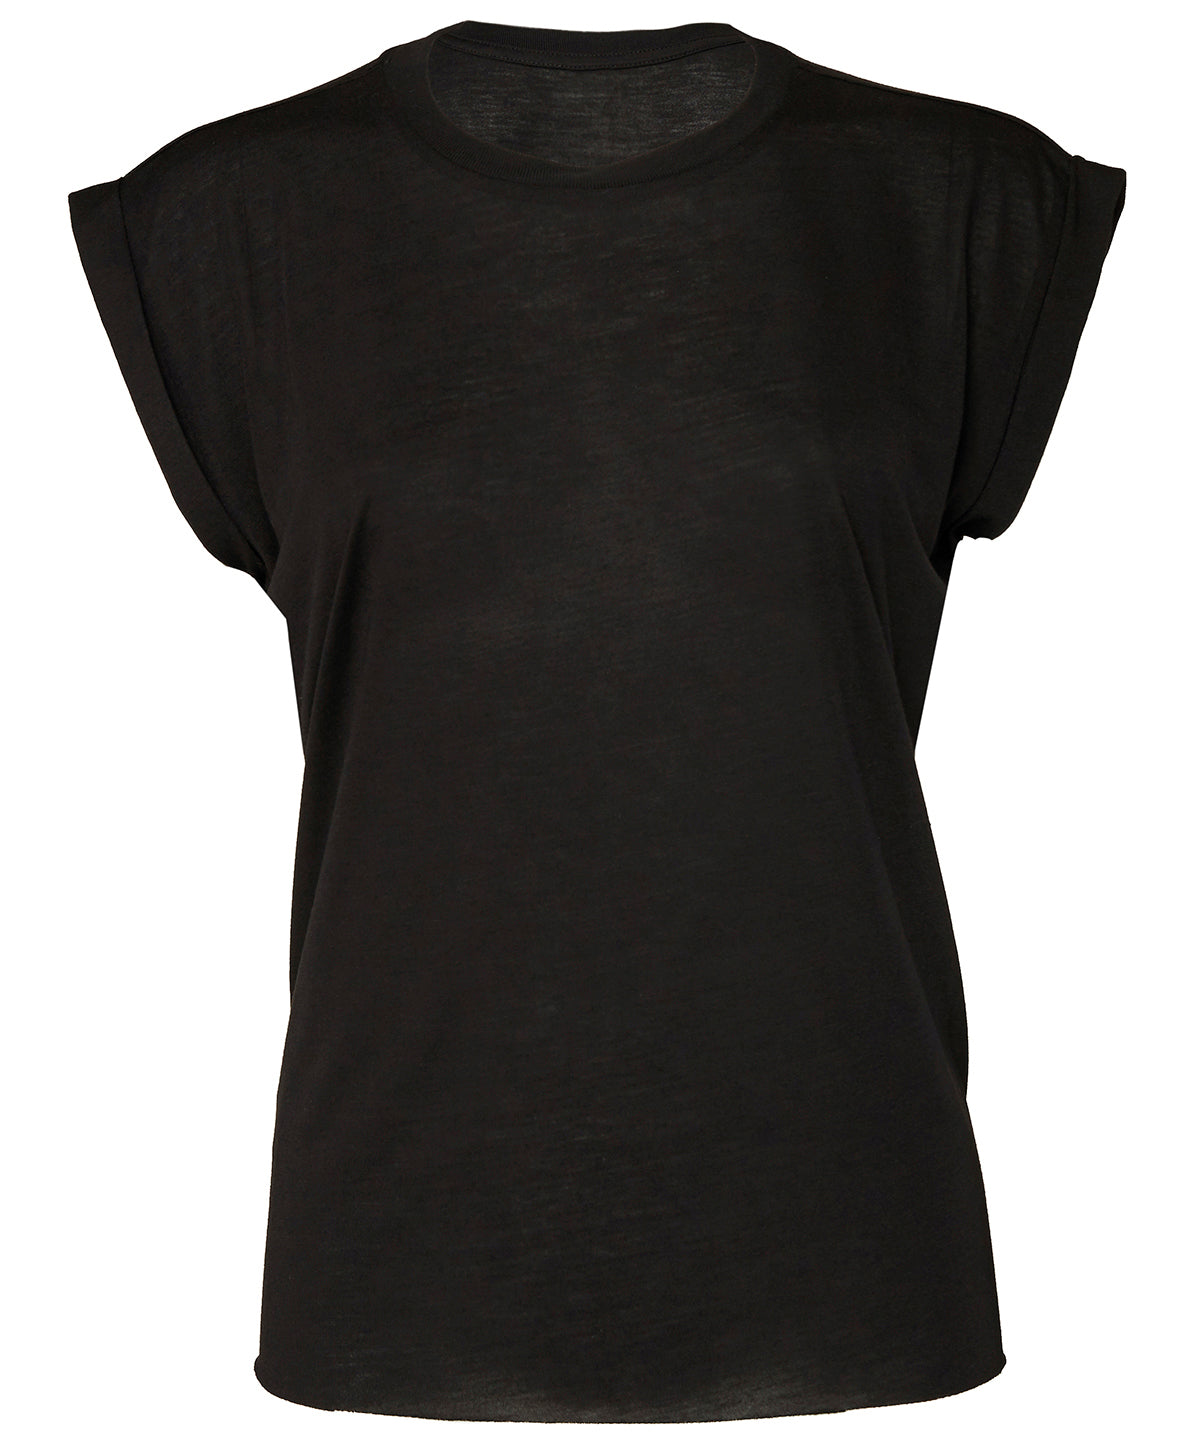 Personalised T-Shirts - Black Bella Canvas Women's flowy muscle tee with rolled cuff